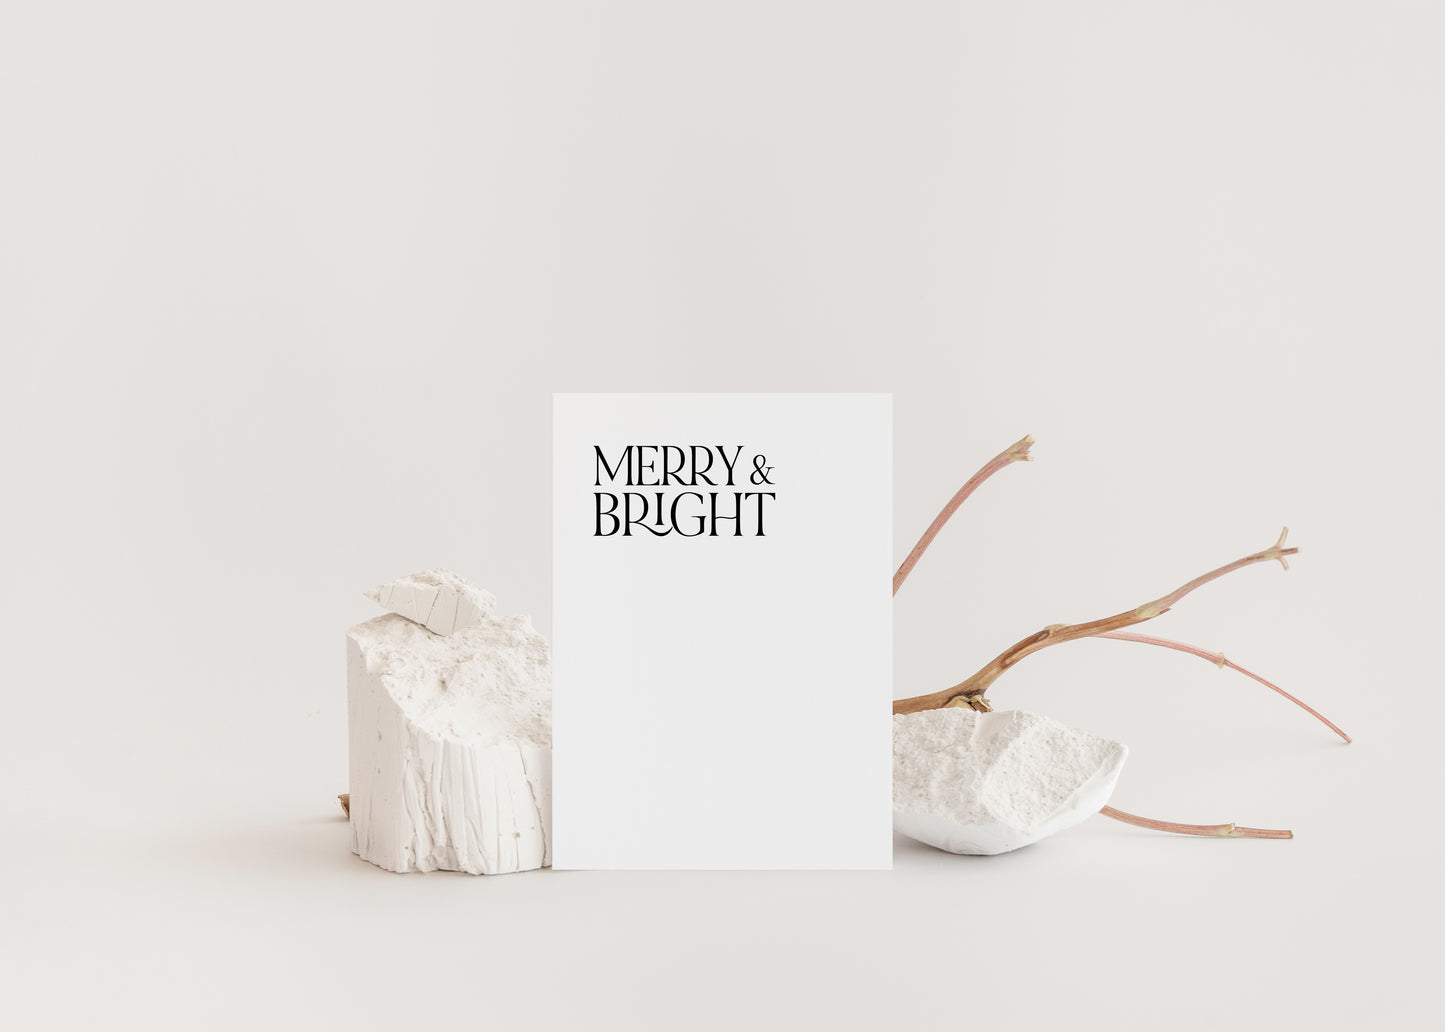 Merry and bright cards, Merry and bright Christmas cards, Christmas pack of cards, Christmas stationery set, Christmas greeting card,Holiday